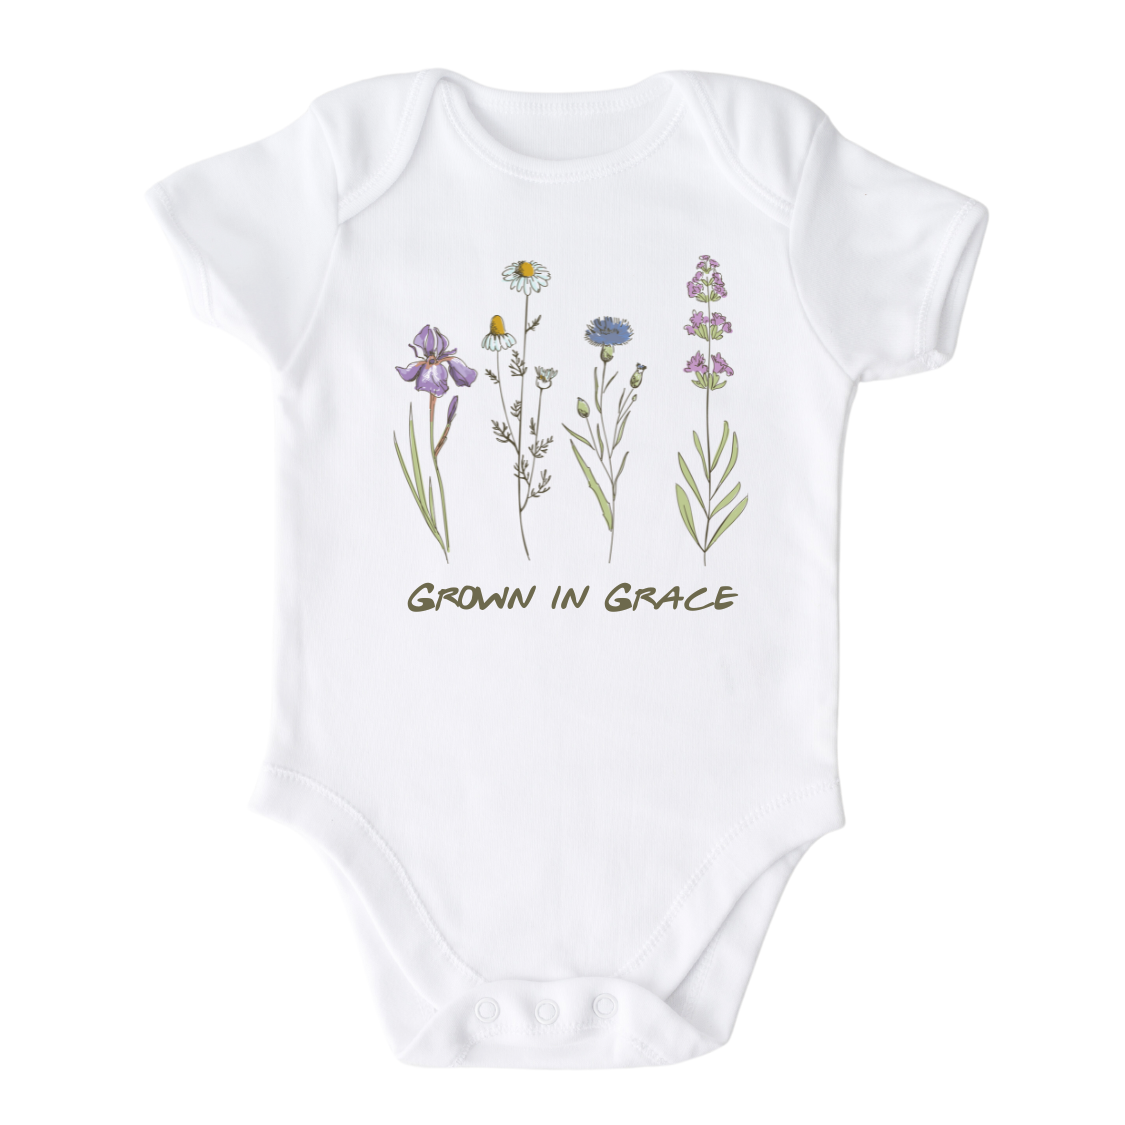 baby announcement onesie personalized baby girl gifts custom baby onesie infant clothes cute baby girl clothes funny baby clothes newborn onesies unisex newborn boy onesies funny onesies for babies cute baby stuff